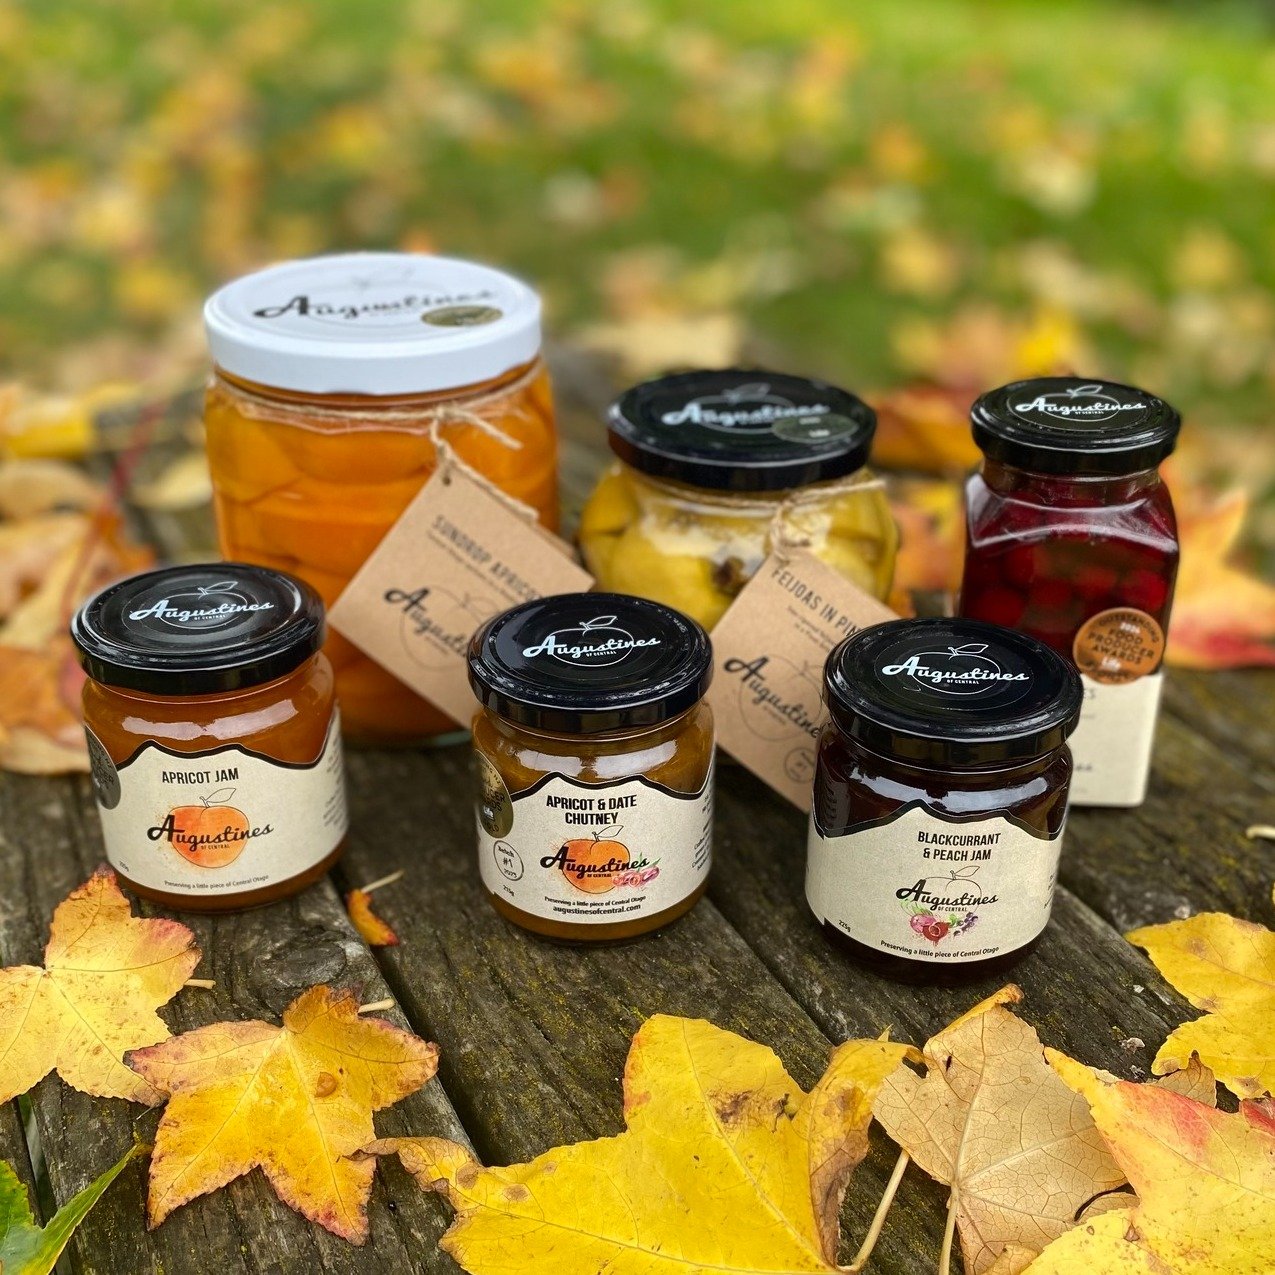 Looking for the perfect foodie gift? We&rsquo;ve made a start with our Variety Pack and you can enhance it by adding a choice of local cheese, your favourite artisan crackers or perhaps a bar of local chocolate and create your own &ldquo;Artisan Food